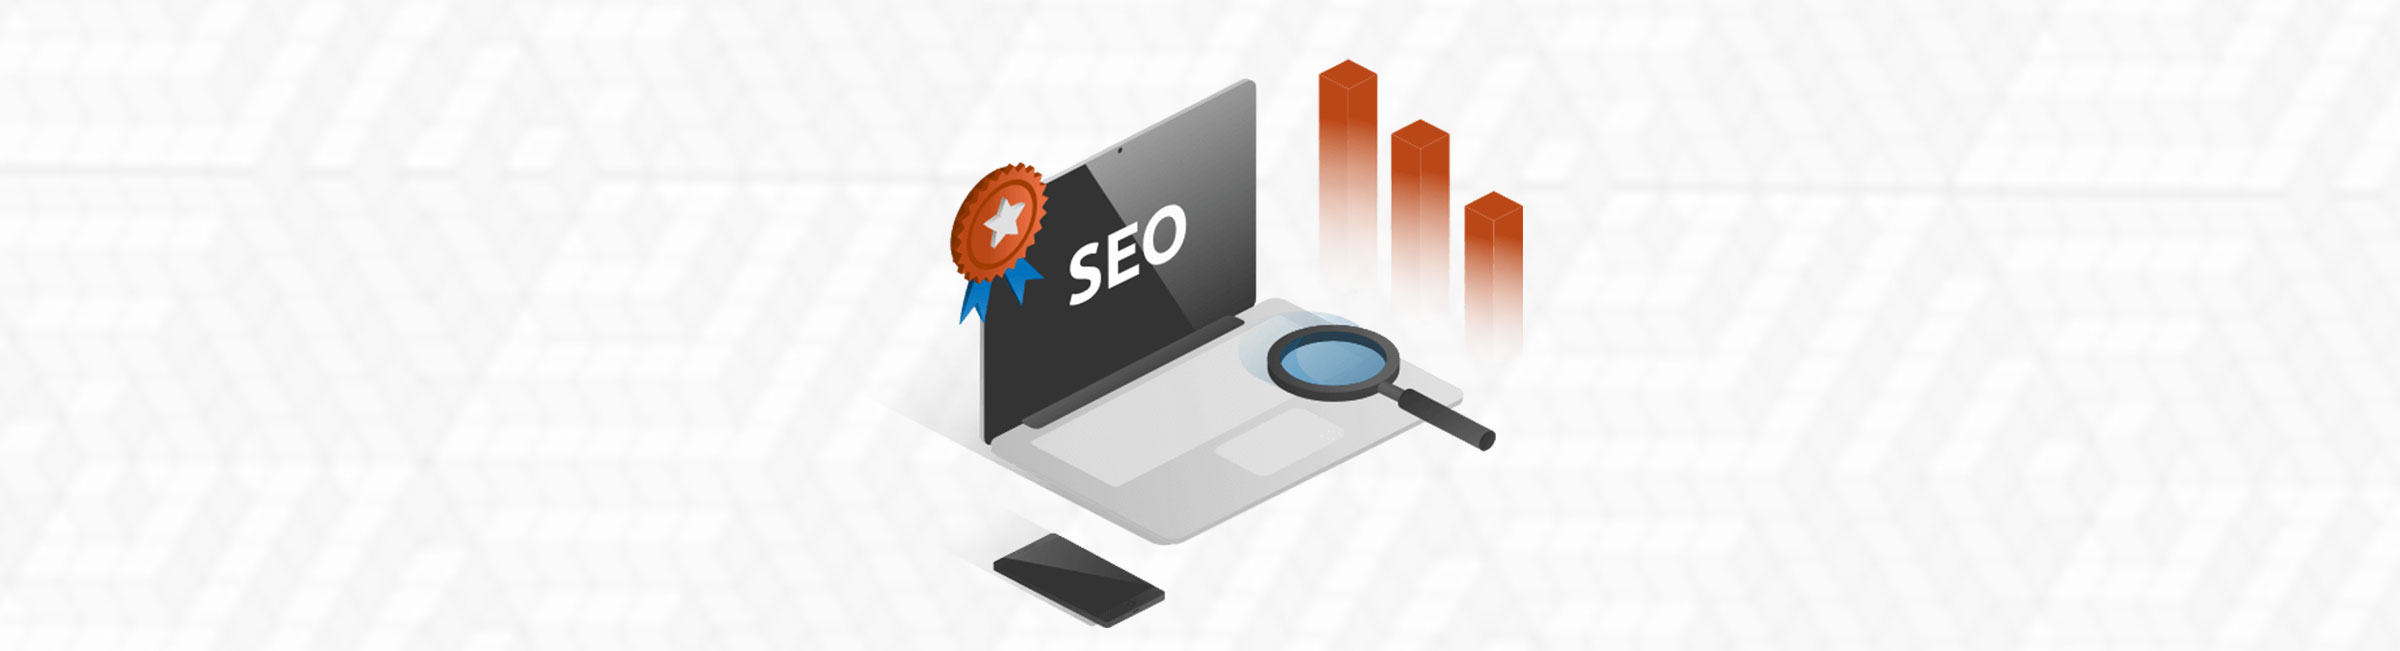 Semrush SEO Toolkit Exam Competitive Analysis and Keyword Research Test